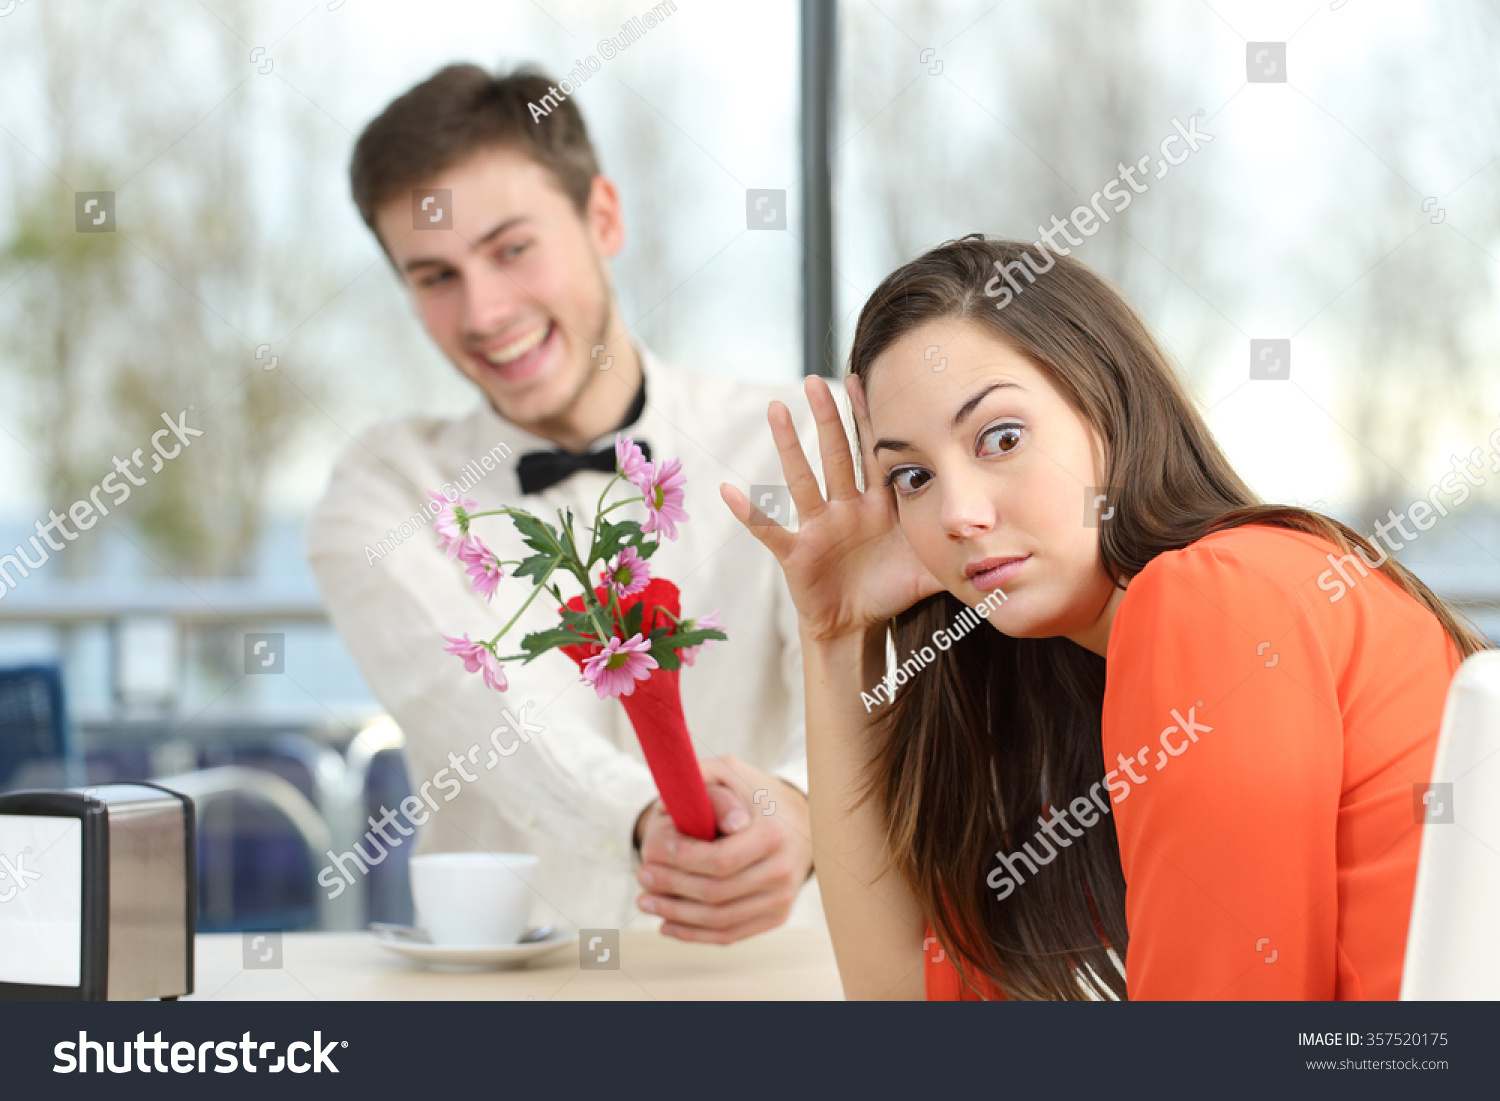 Disgusted woman rejecting a geek boy offering flowers in a blind date in a coffee shop interior #357520175